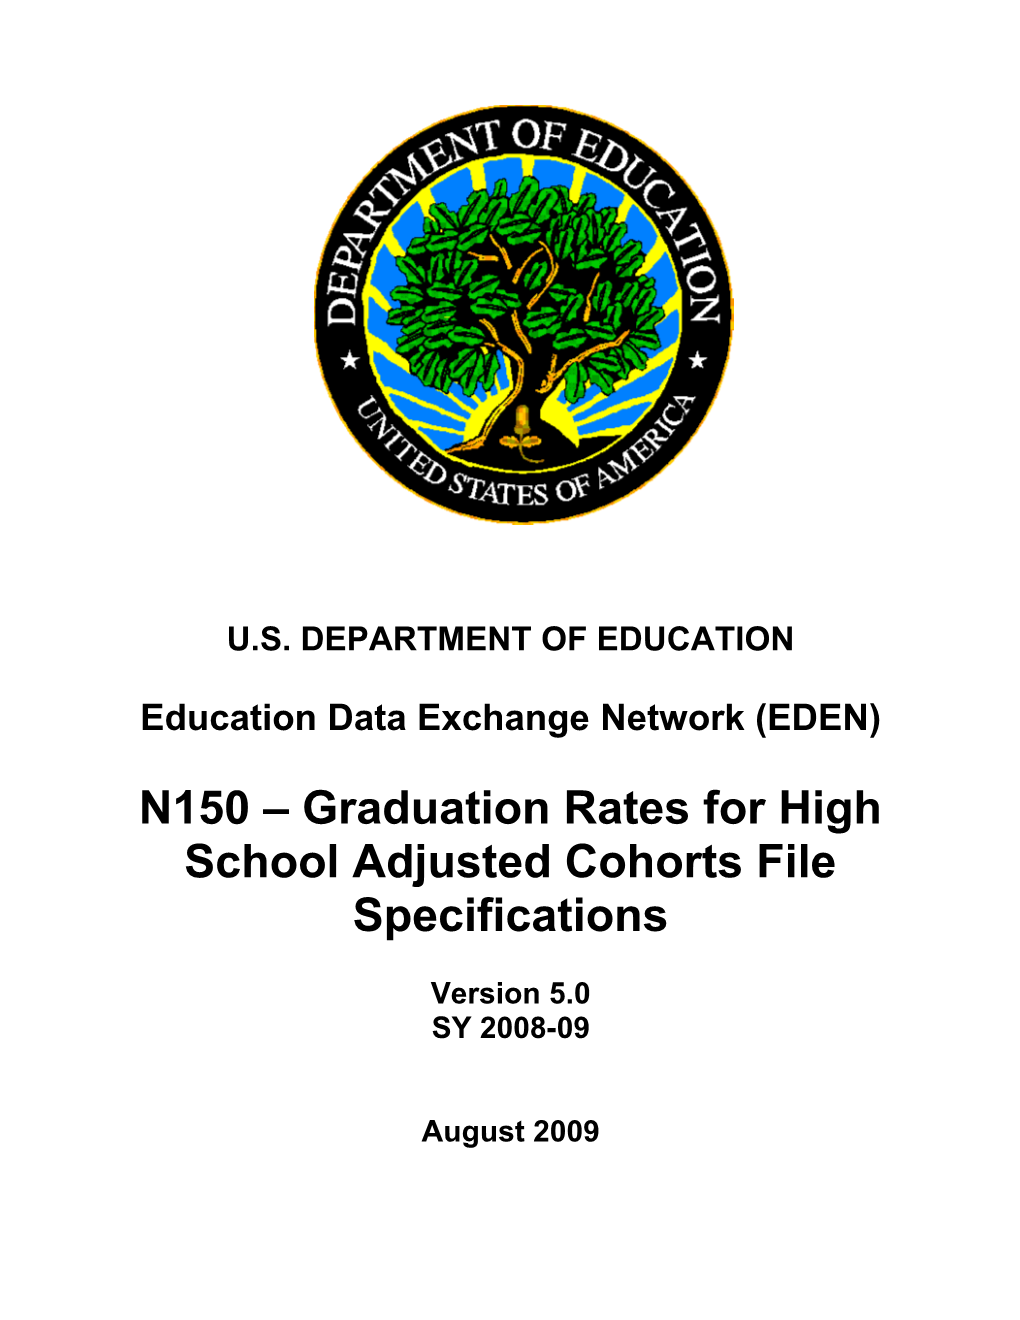 N150 Graduation Rates for High School Adjusted Cohorts File Specifications (MS Word)